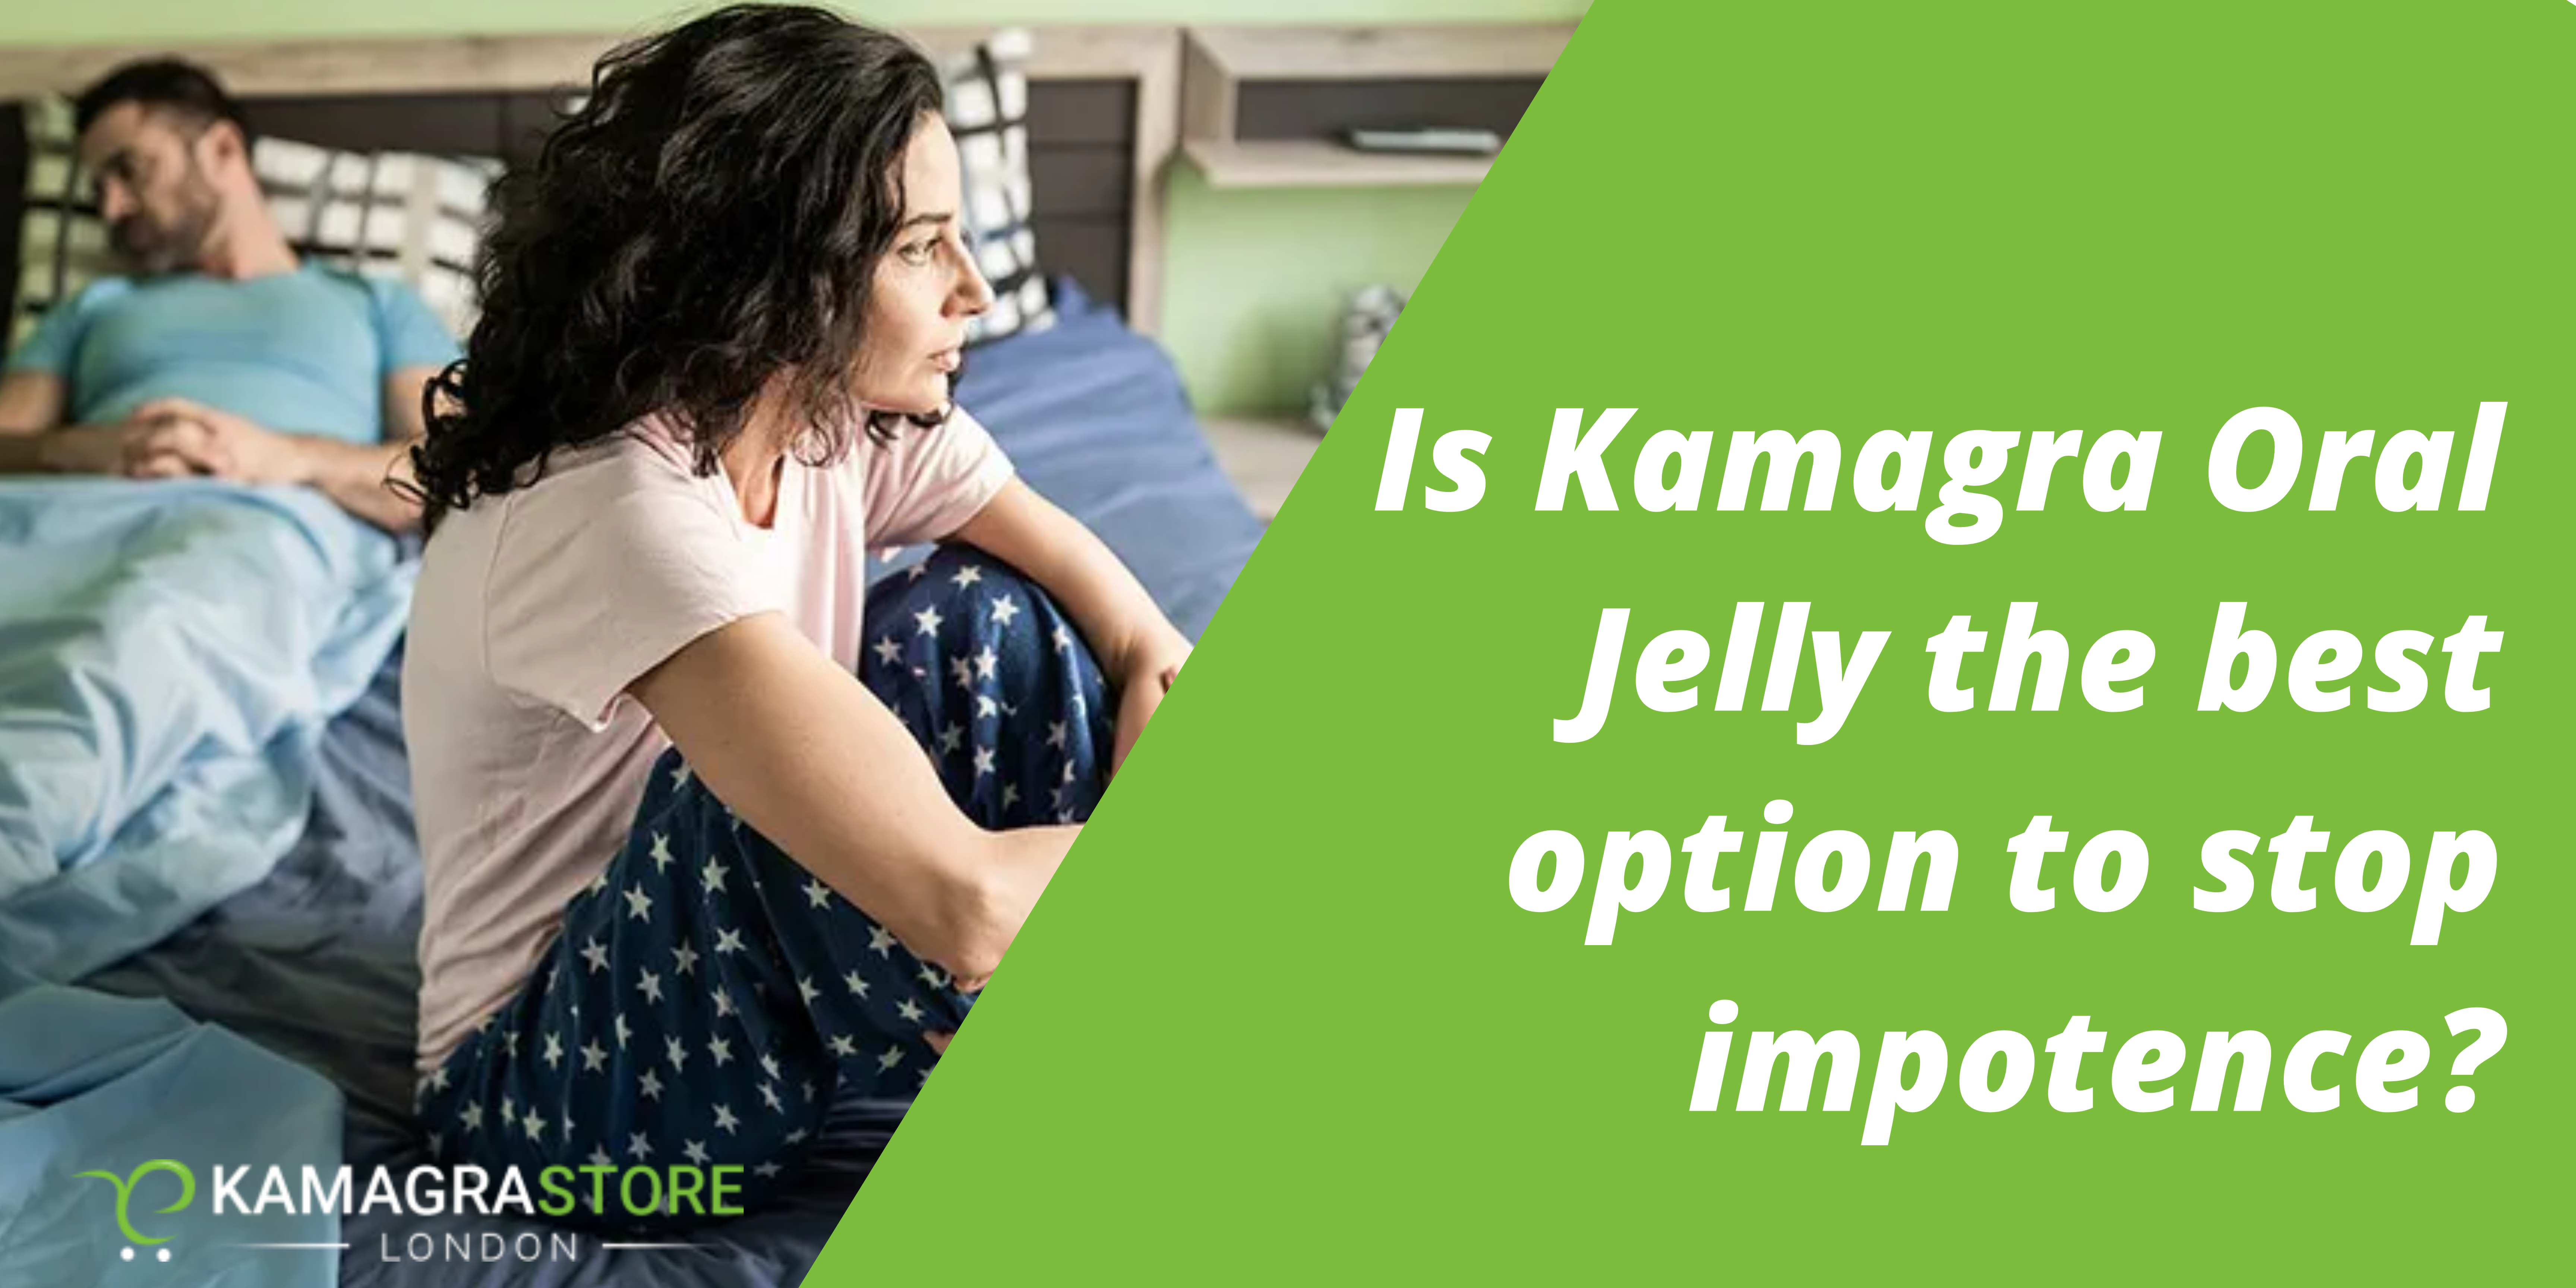 Is Kamagra Oral Jelly the best option to stop impotence